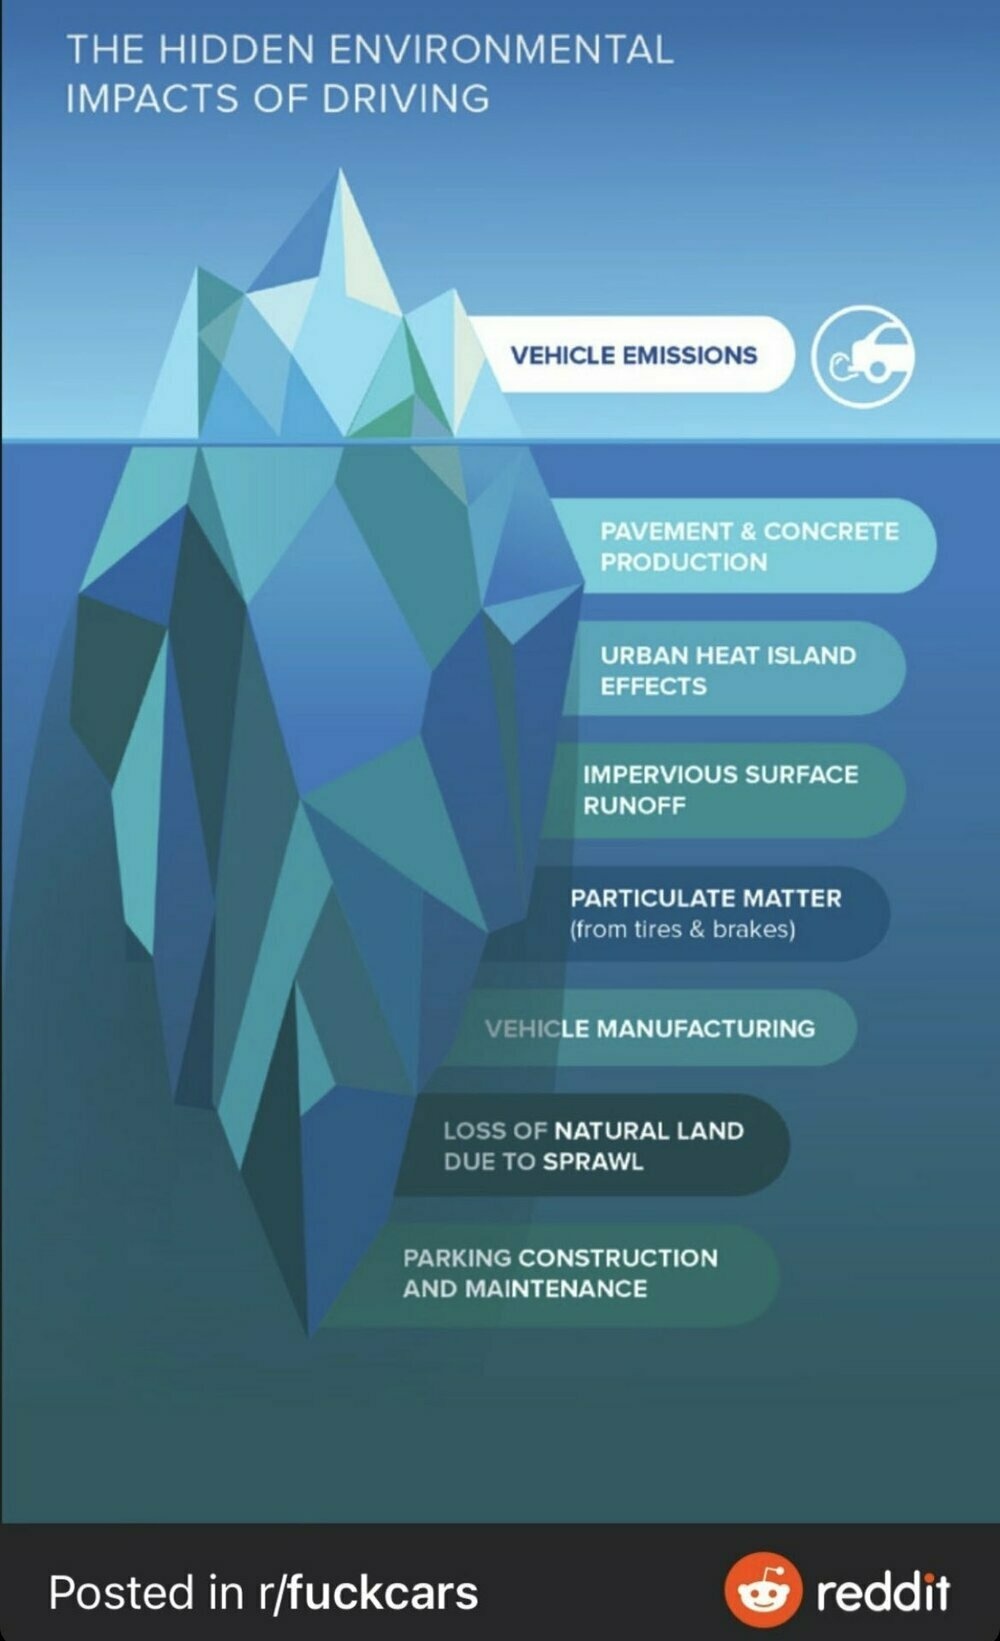 Infographic titled ‘Hidden Environmental Impacts of Driving’. It shows an iceberg, the majority of which is submerged under water. Above the water is written ‘vehicle emissions’. Below the water many more environmental impacts are listed: ‘pavement & concrete production’, ‘urban heat island effects’, ‘impervious surface run-off’, ‘particulate matter (from tires & brakes)’, ‘vehicle manufacturing’, ‘loss of natural land due to sprawl’ and ‘parking construction and maintenance’. At the bottom of a graphic runs a bar saying ‘posted on /r/fuckcars’ with the Reddit logo.